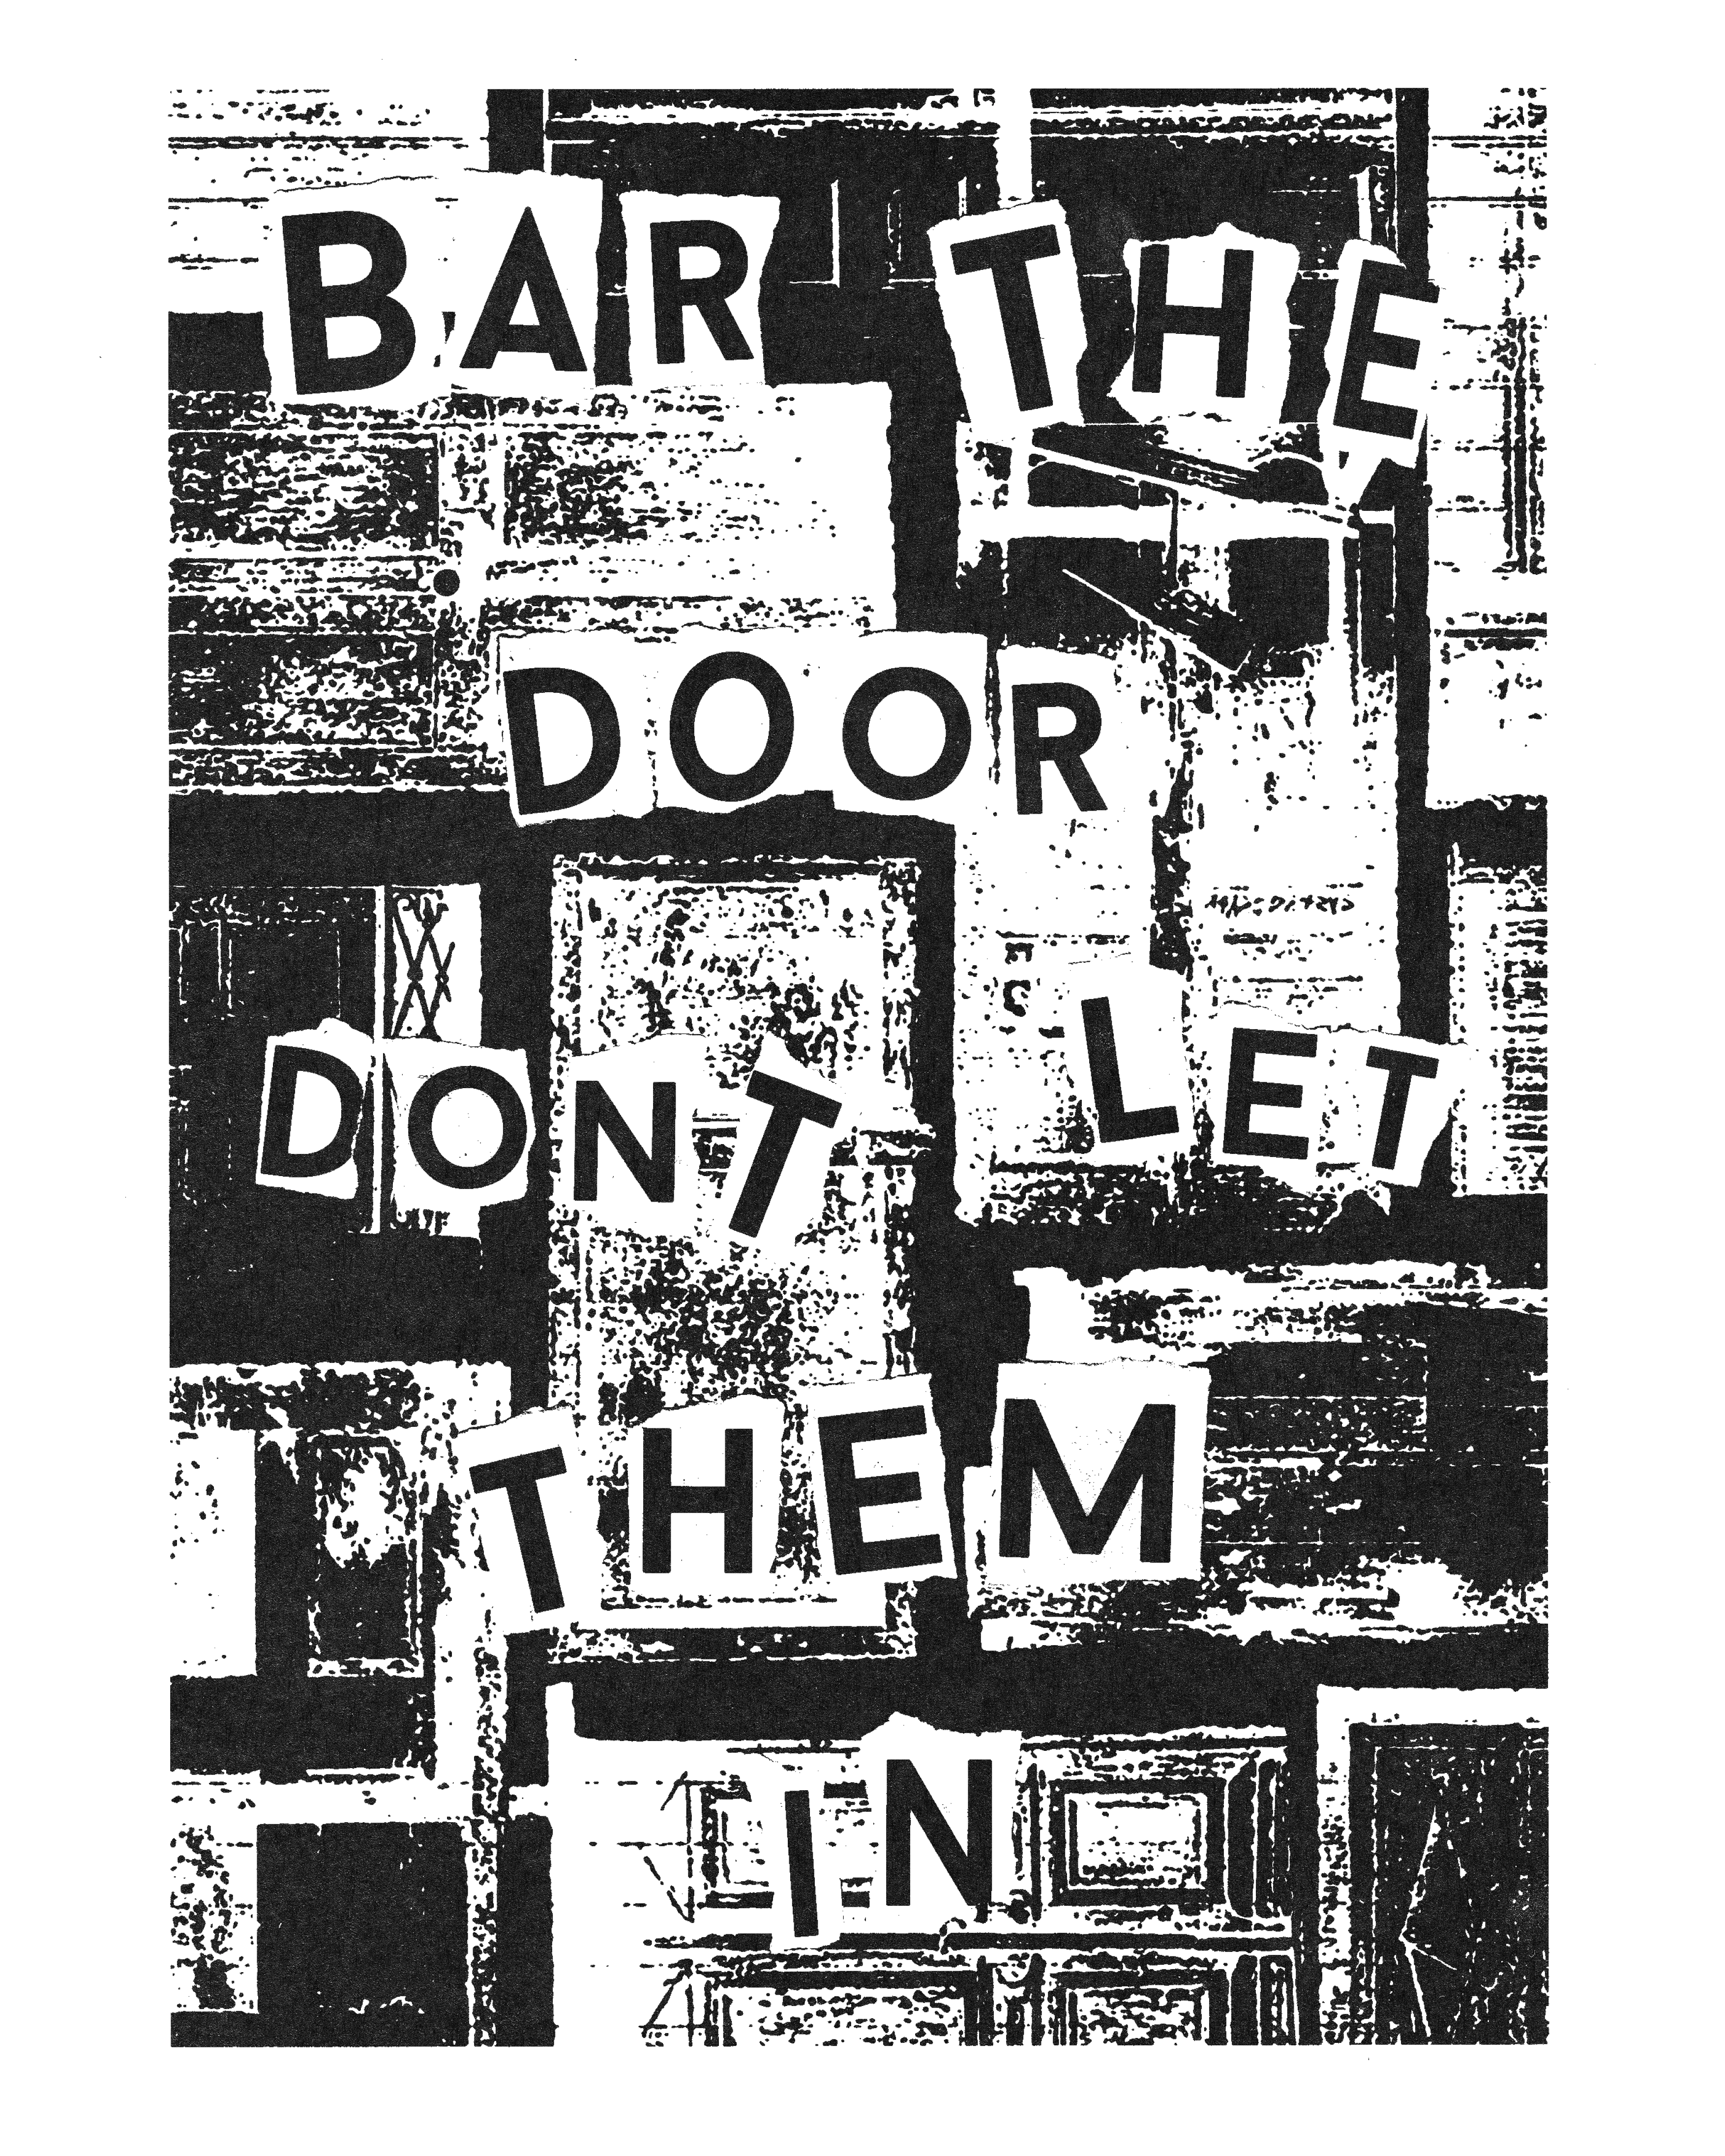 a black and white image of a wall with text